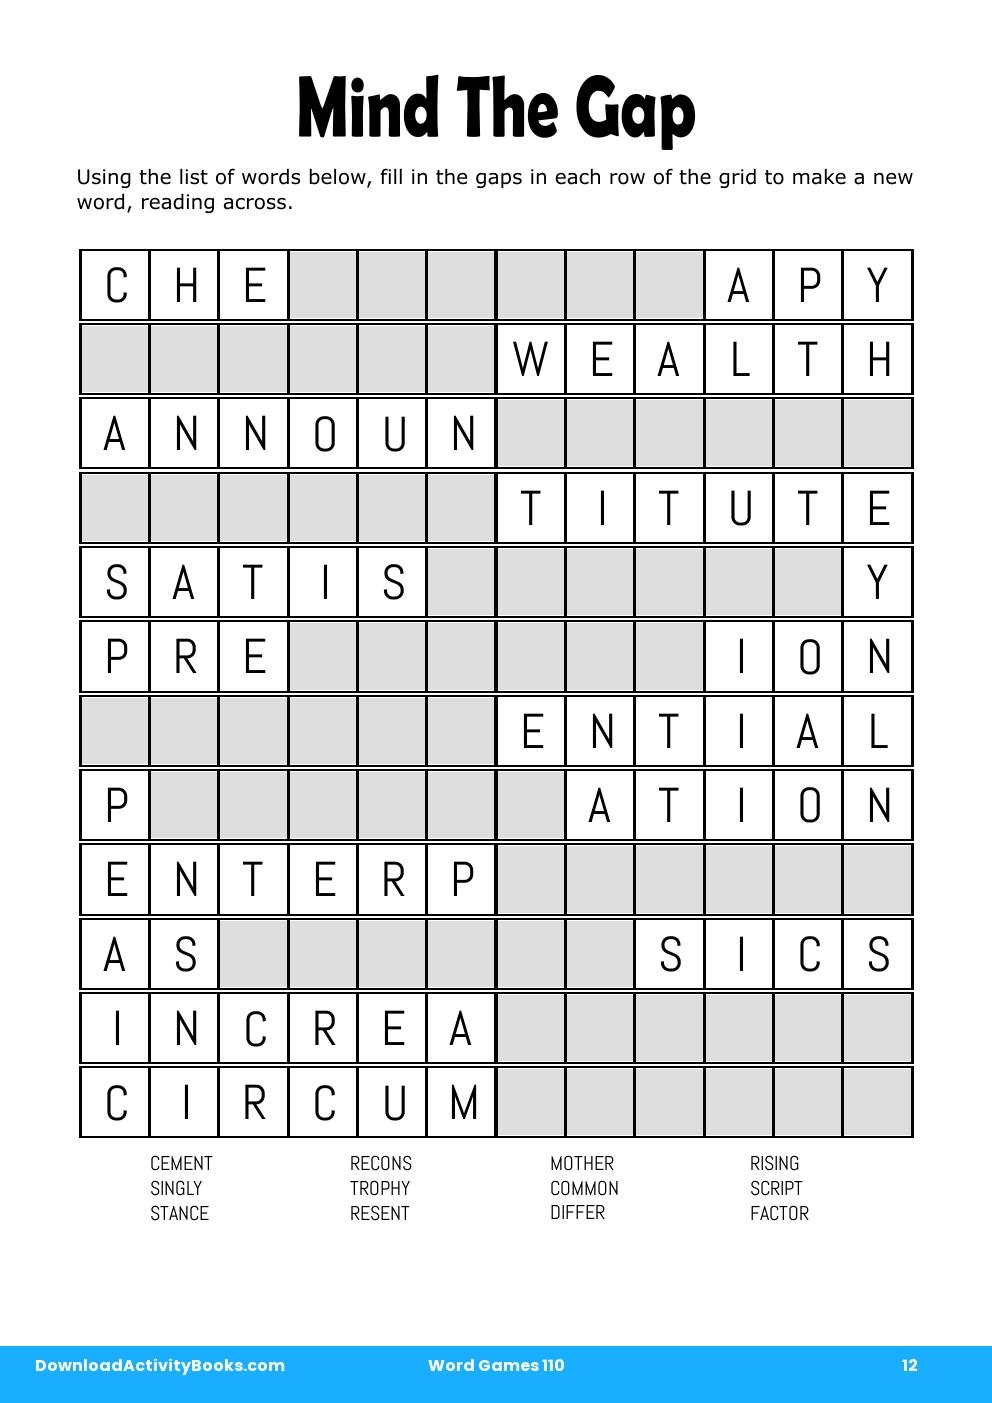 Mind The Gap in Word Games 110